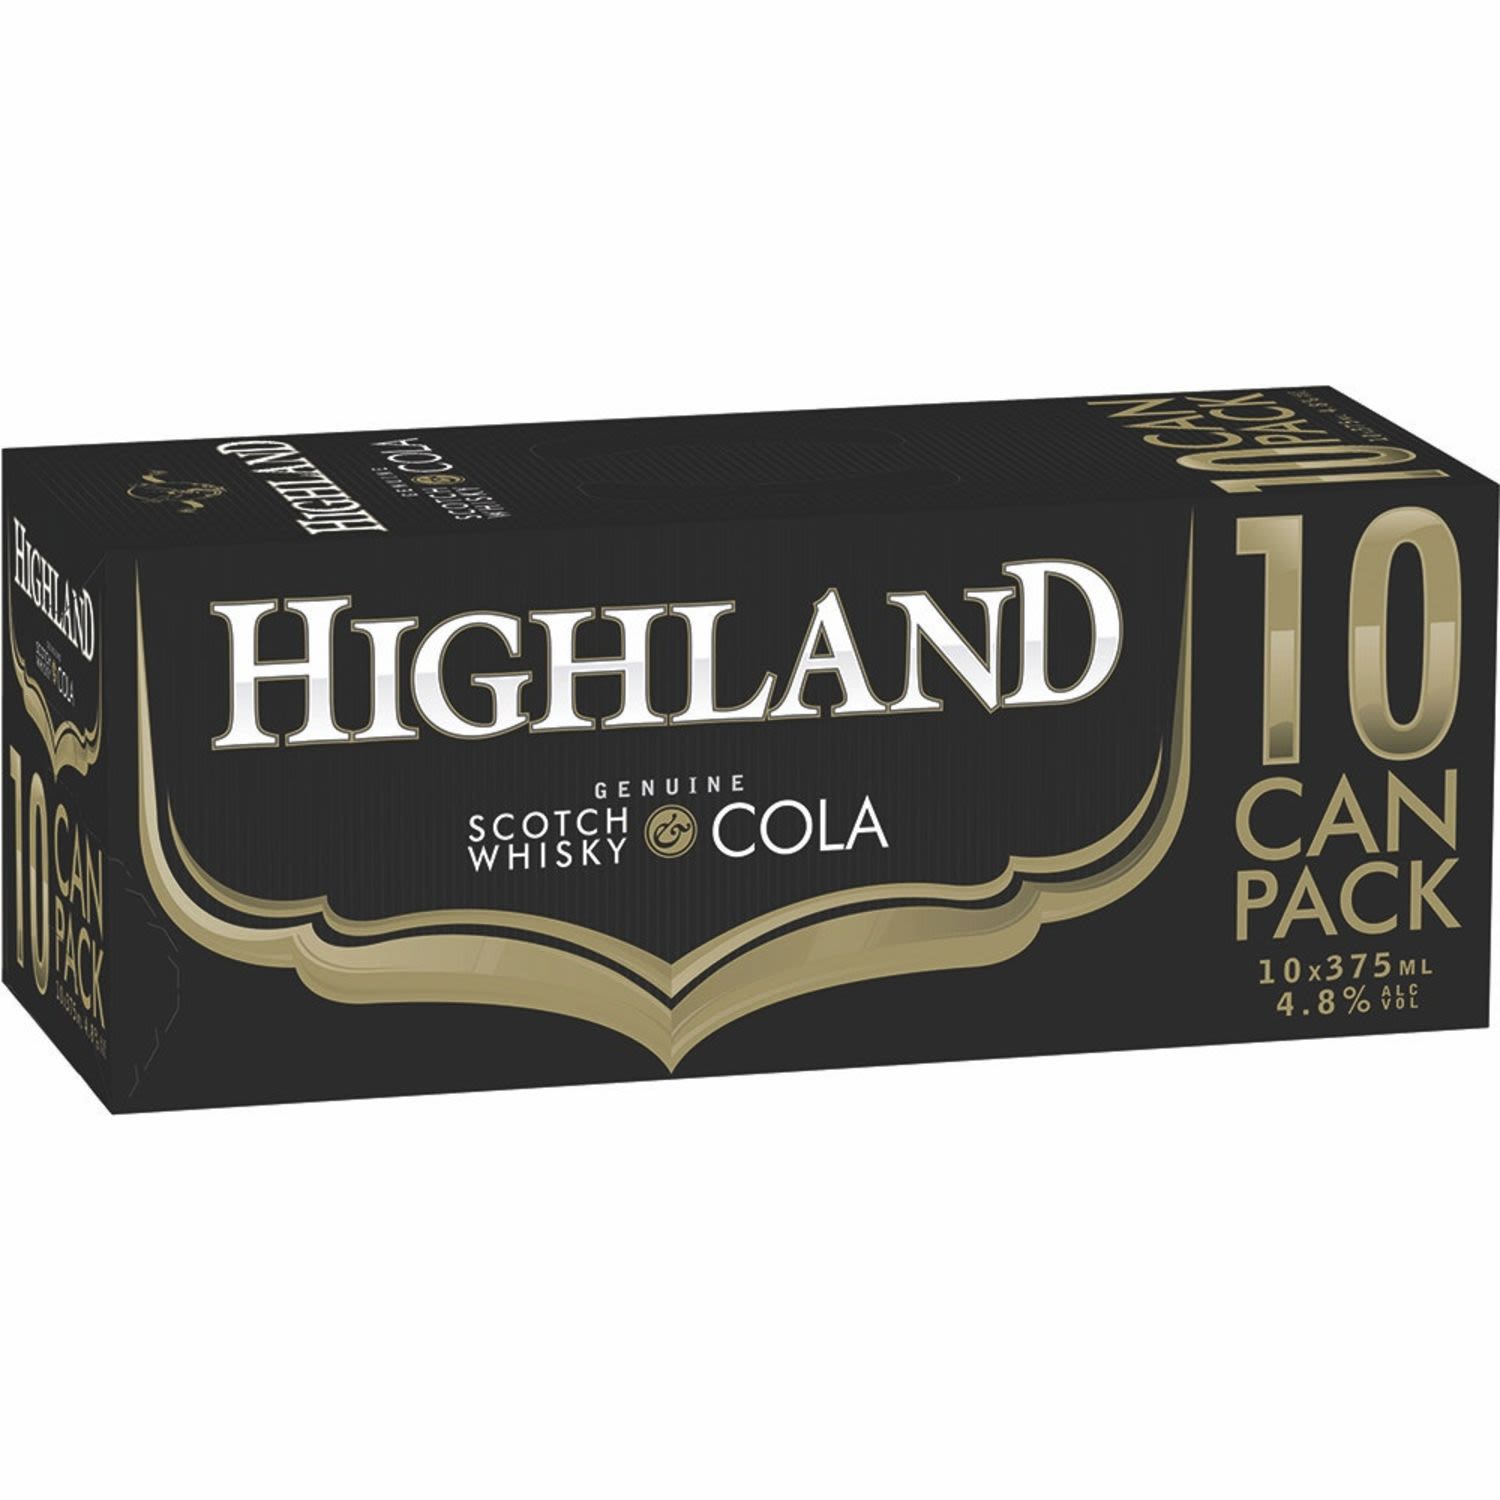 Highland Genuine Scotch Whisky & Cola 4.8% Can 375mL 10 Pack